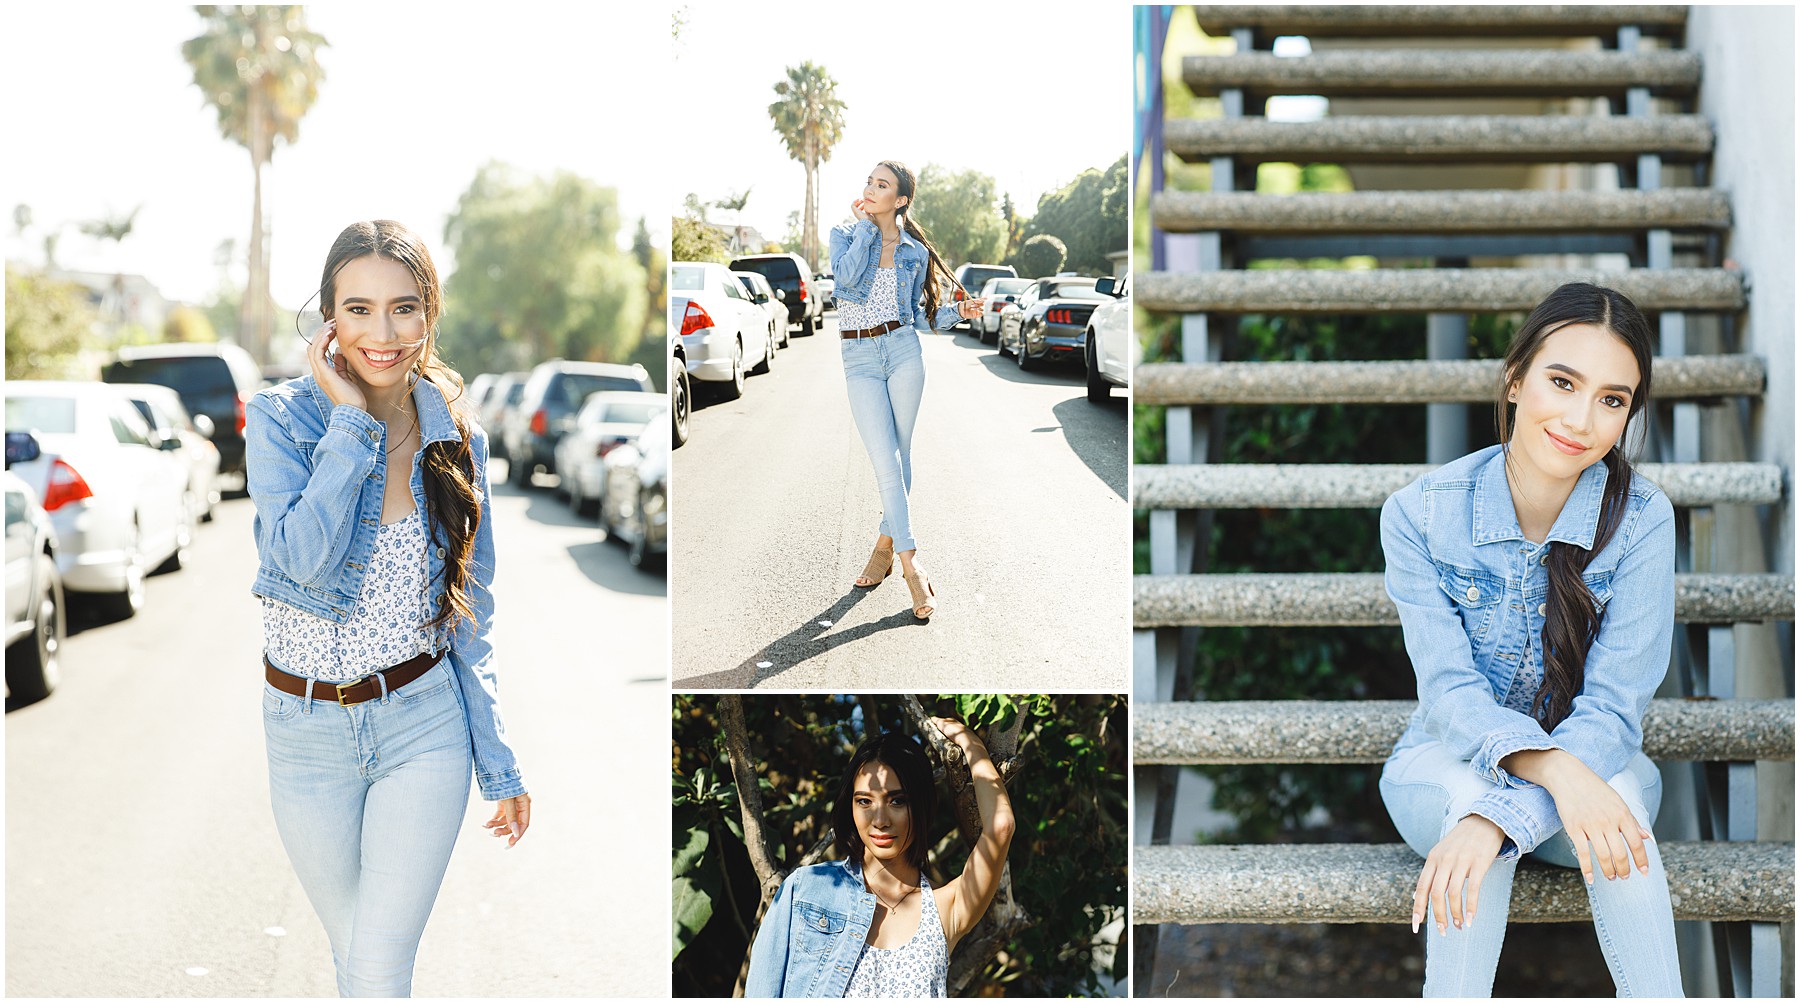 photographed by tara rochelle in souther california in los angeles chic and urban